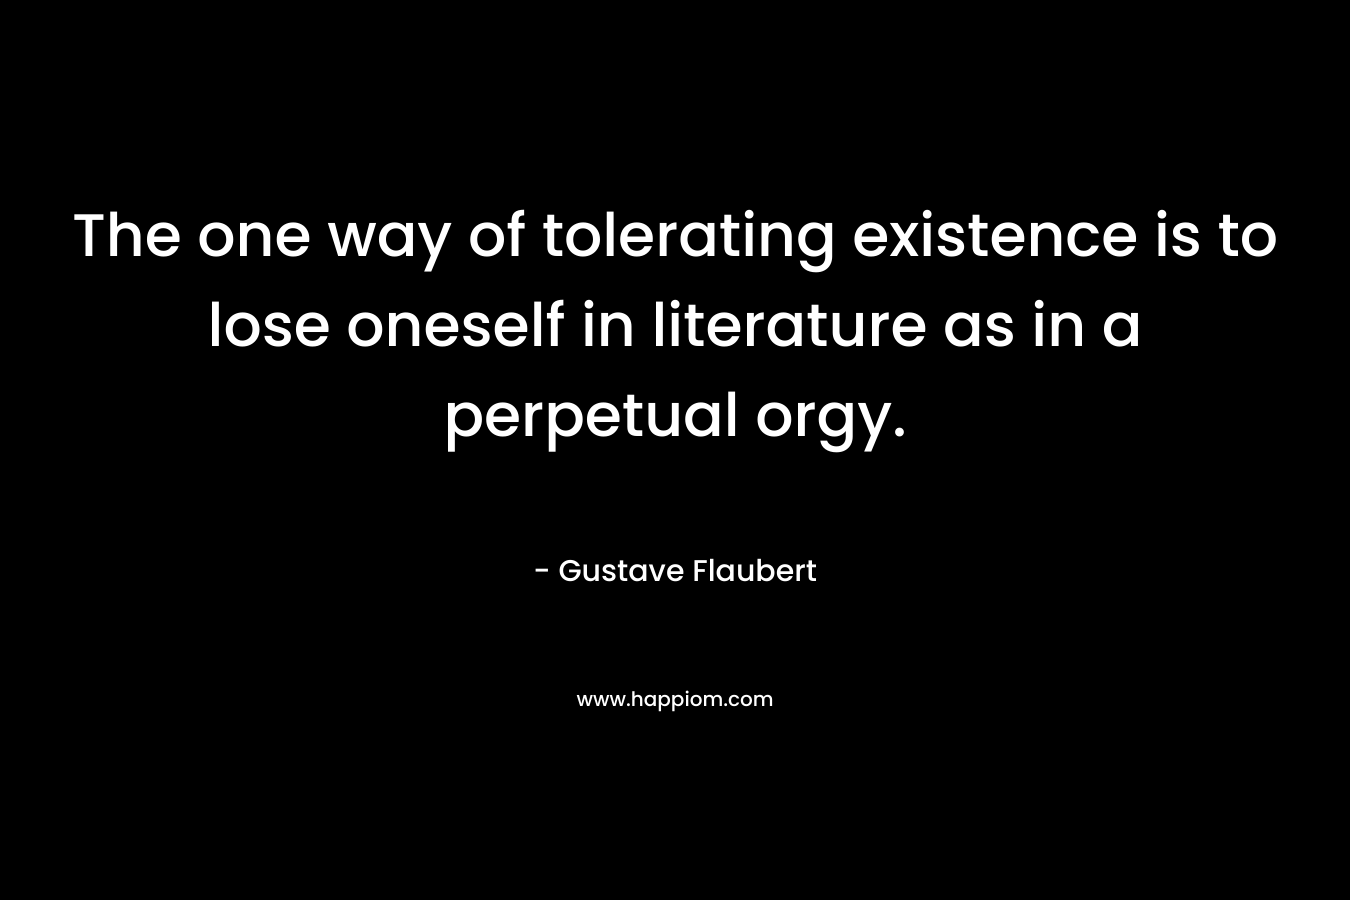 The one way of tolerating existence is to lose oneself in literature as in a perpetual orgy. – Gustave Flaubert